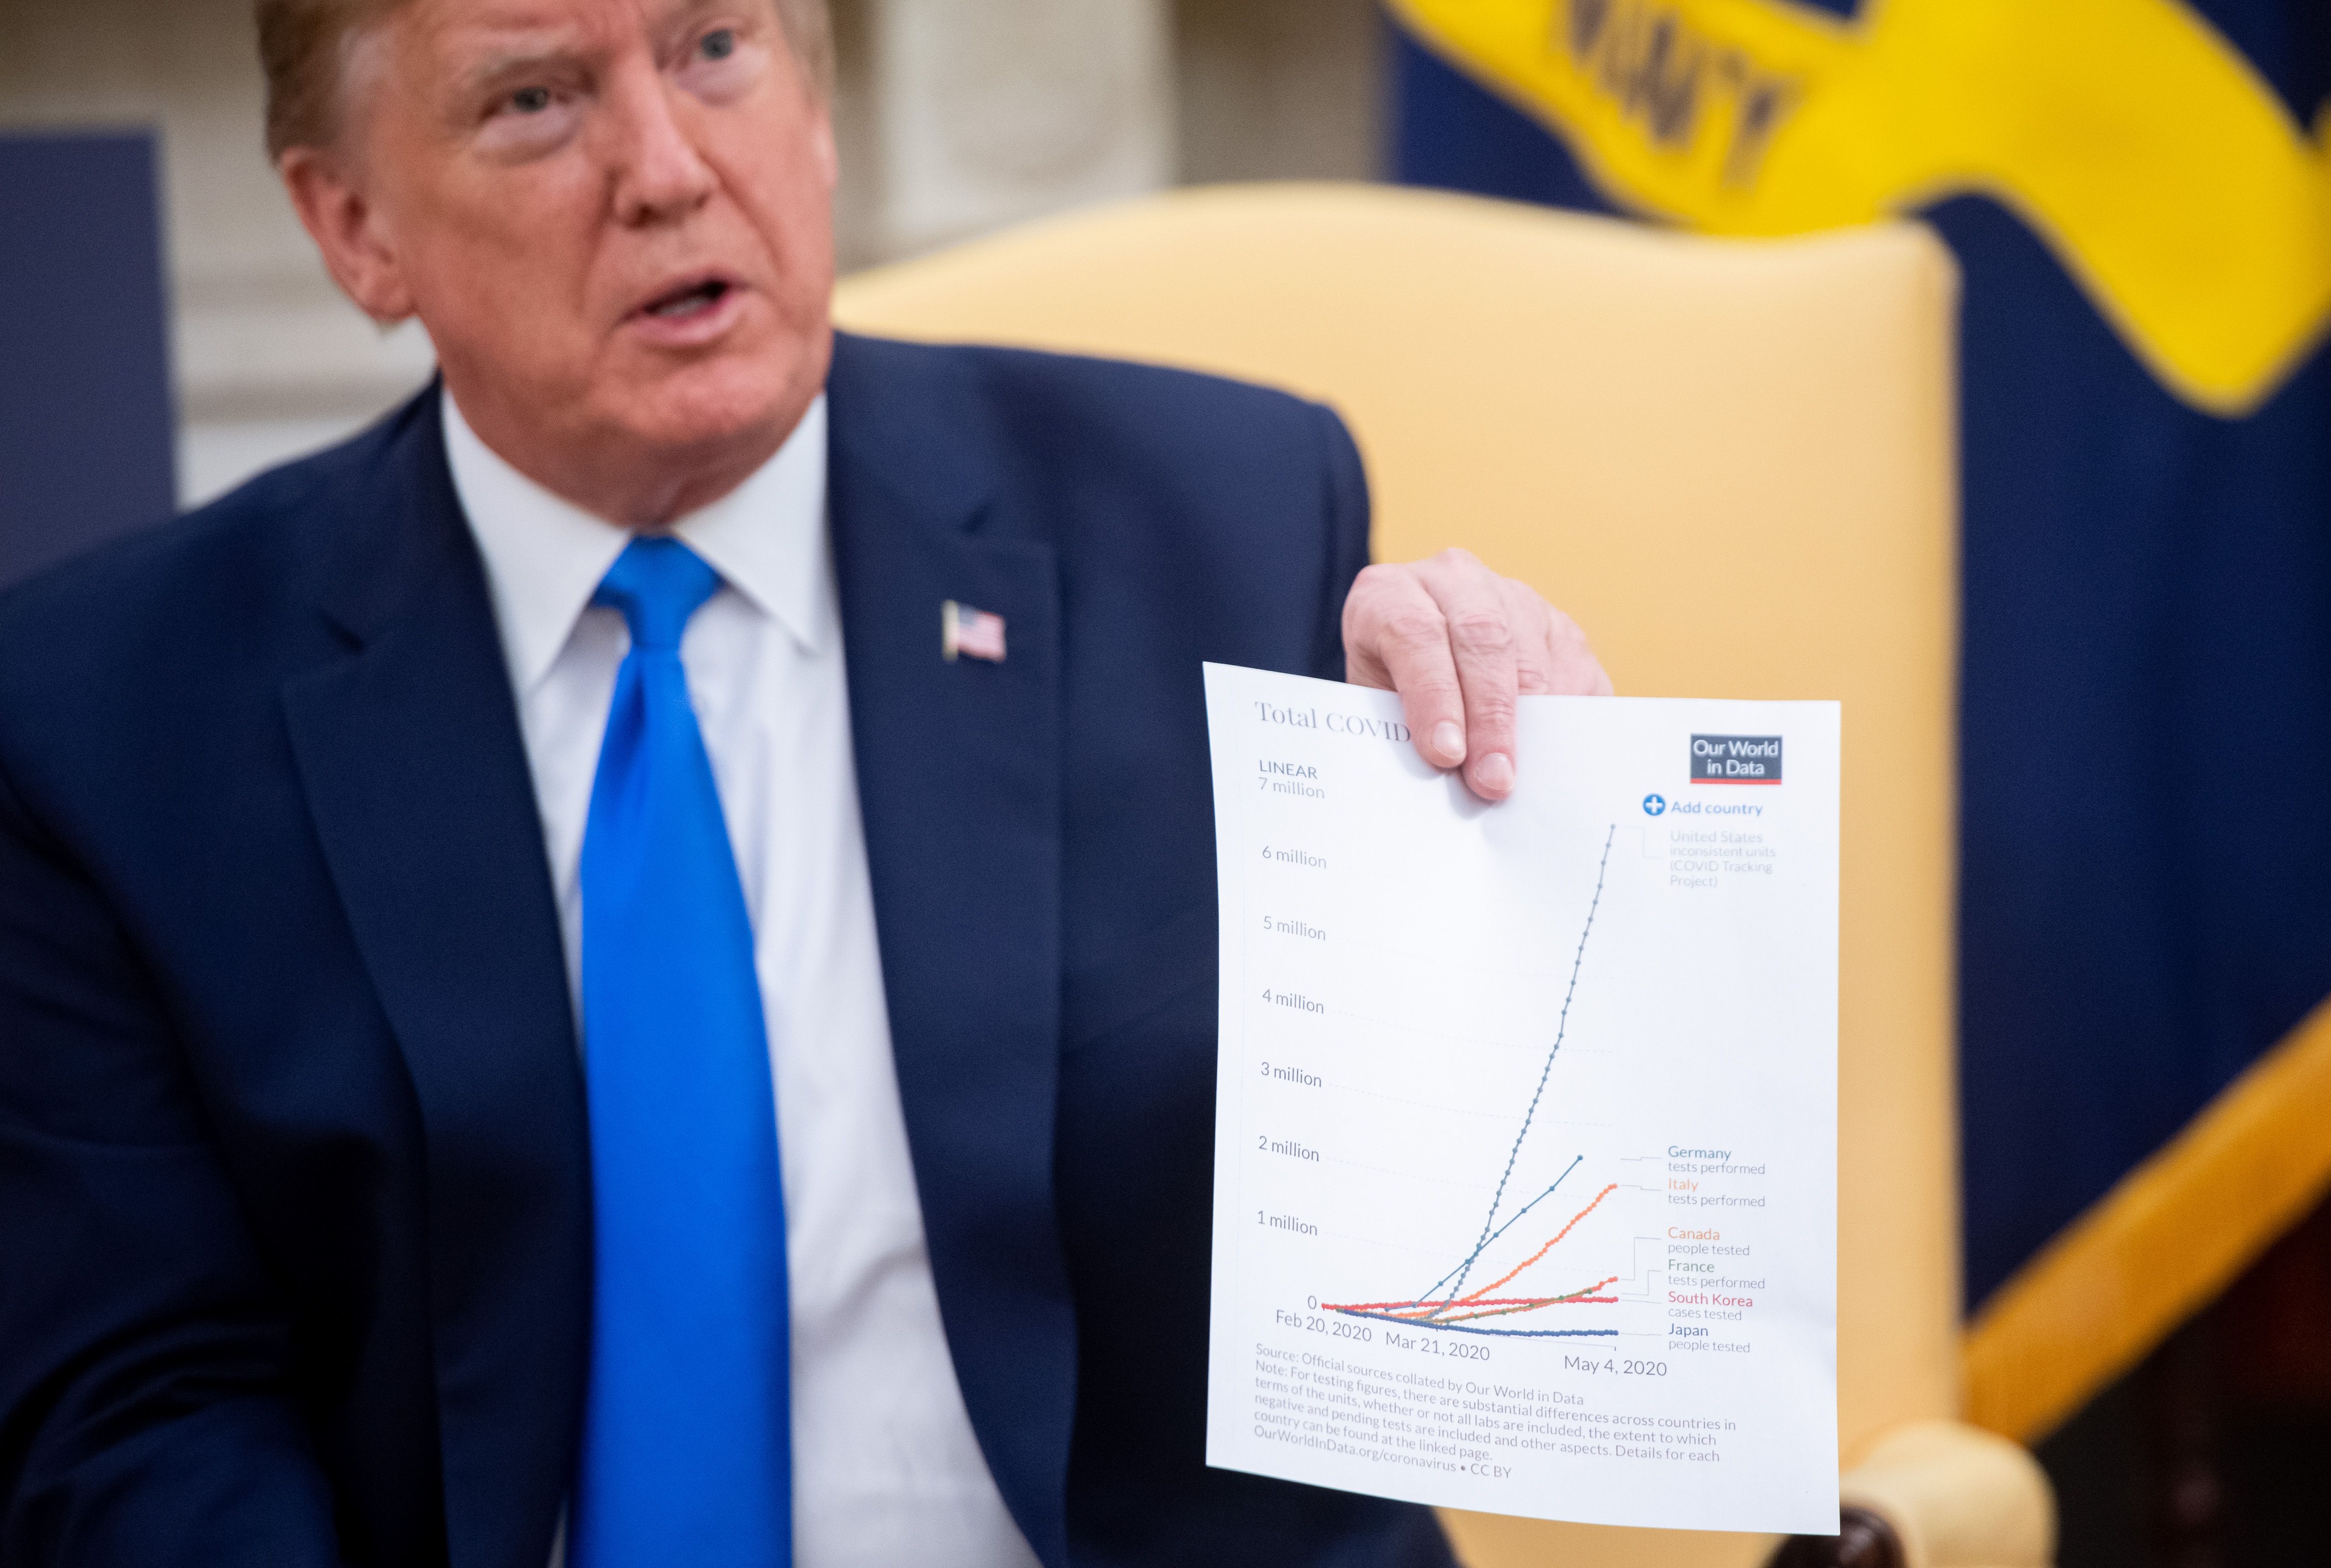 US President Donald Trump holds up a chart showing the rates of COVID-19 testing around the world during a meeting with the Governor of Iowa in the Oval Office of the White House in Washington, DC, on May 6, 2020. (Photo by SAUL LOEB/AFP via Getty Images)